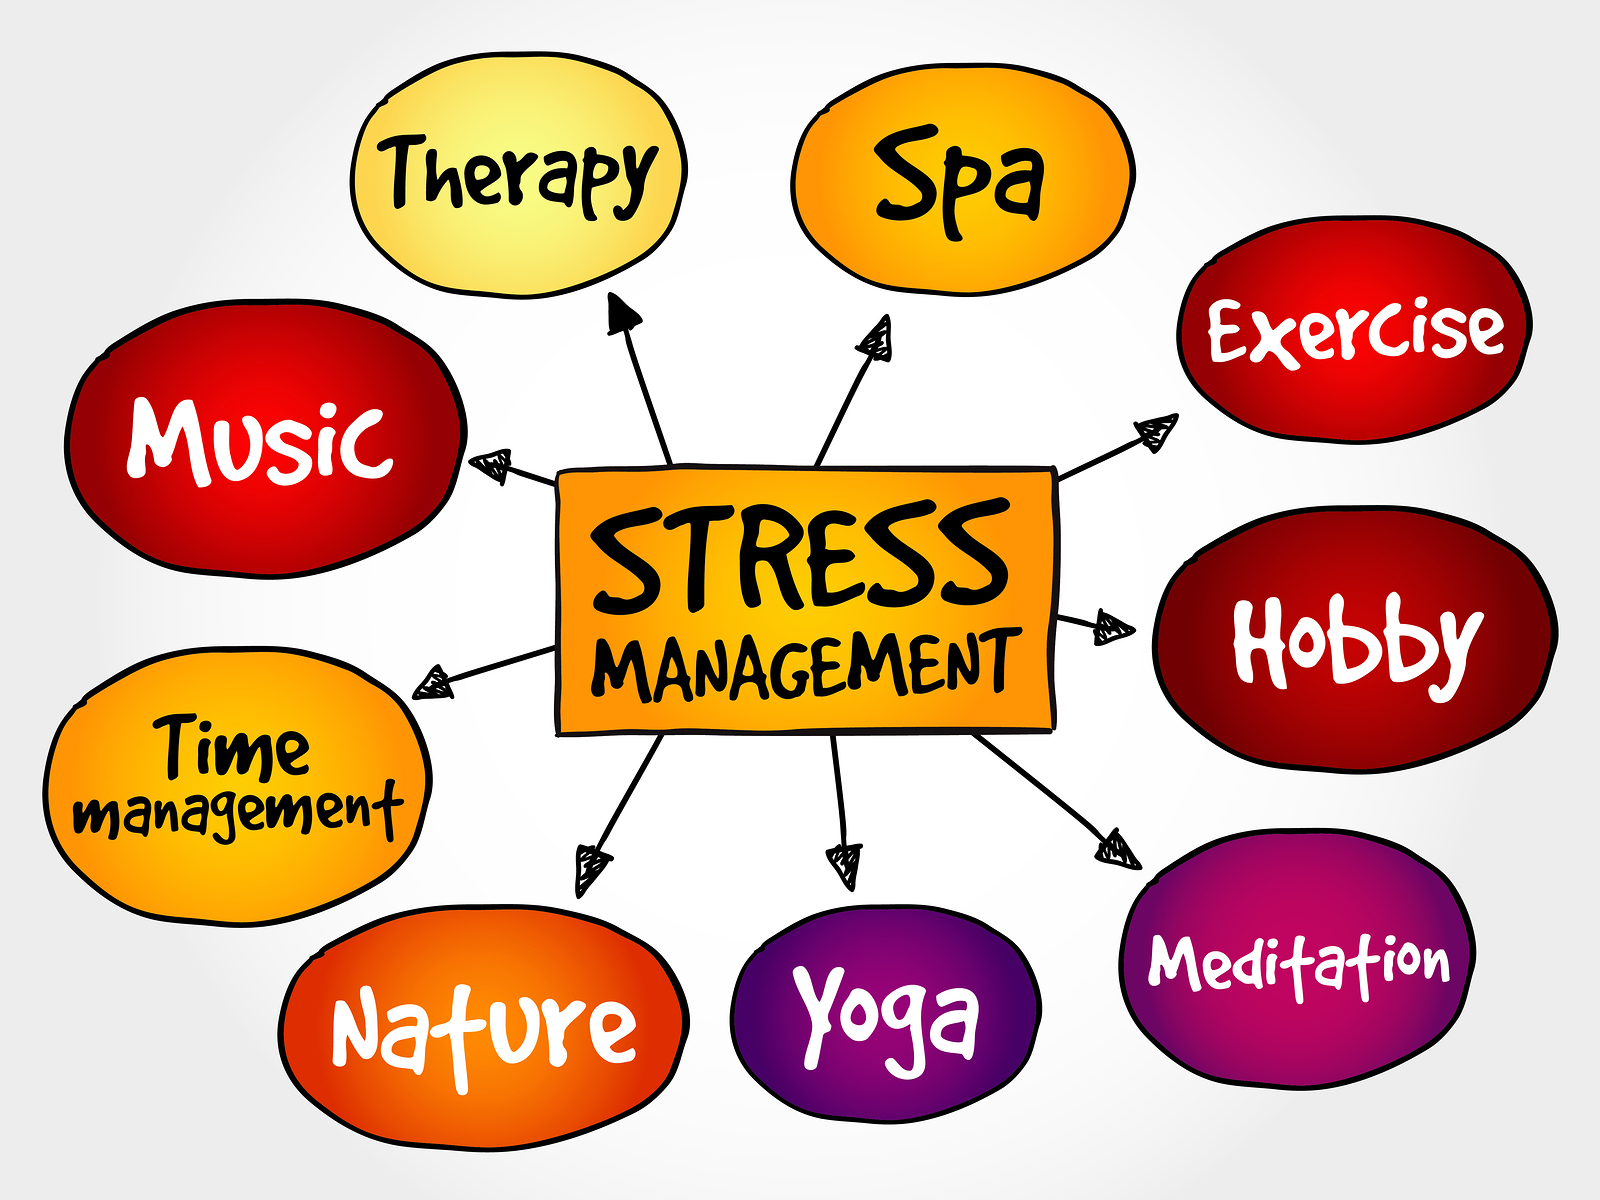 hypothesis on stress management